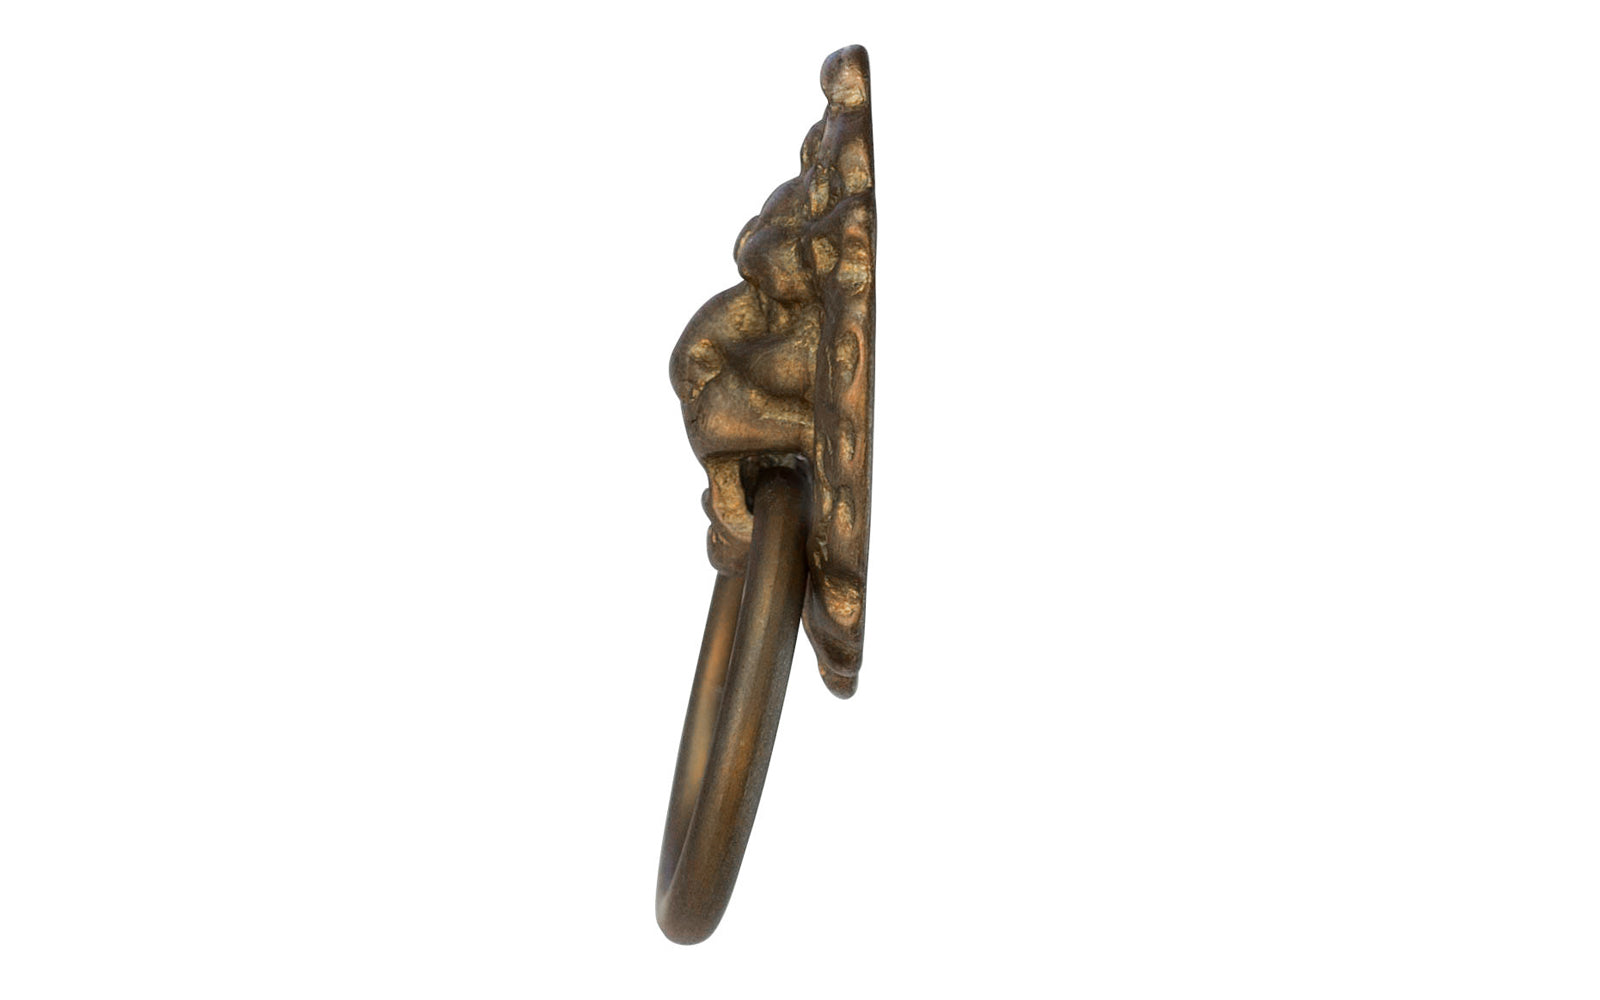 Classic & traditional lion-head ring pull. Great for embellishment of cabinets, drawers, & furniture. Made of quality solid brass material, this ring pull is thick & stout for durable use. Designed in the 19th century style, Victorian style, Duncan Phyfe style of hardware. Antique Brass Finish.